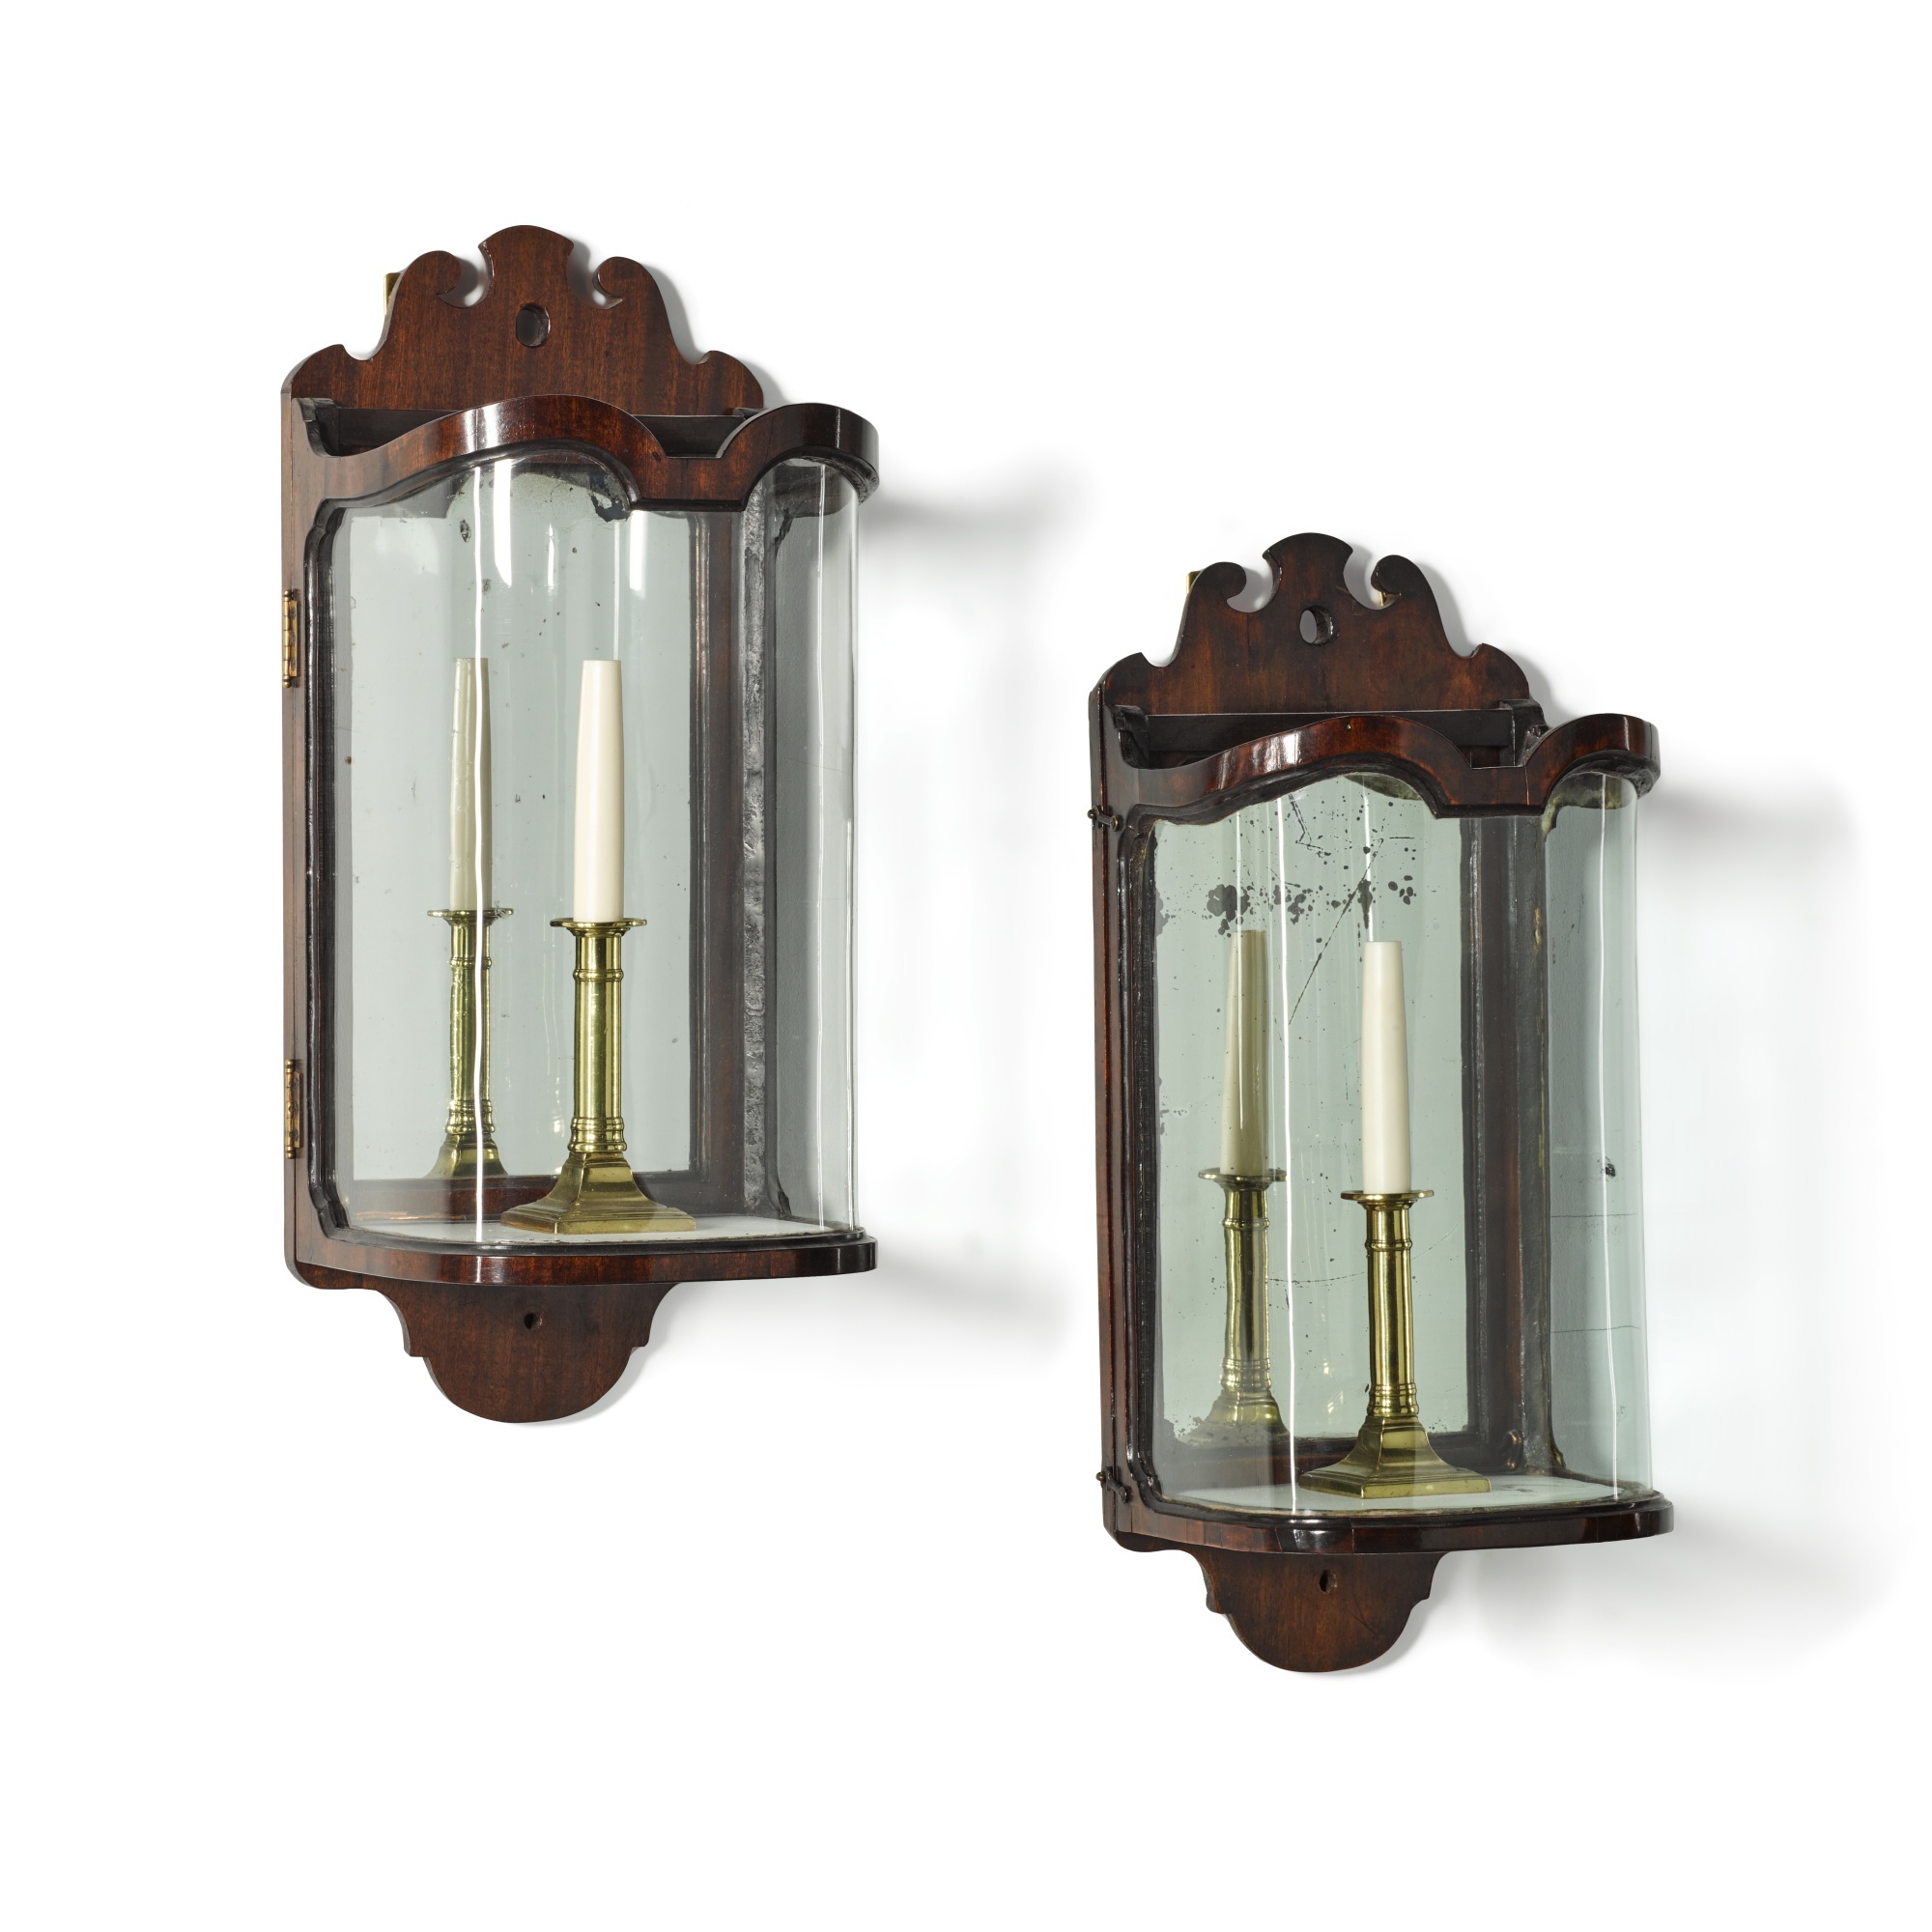 A George III mahogany, mirrored and glazed wall-lantern, circa 1760, together with a matching lanter